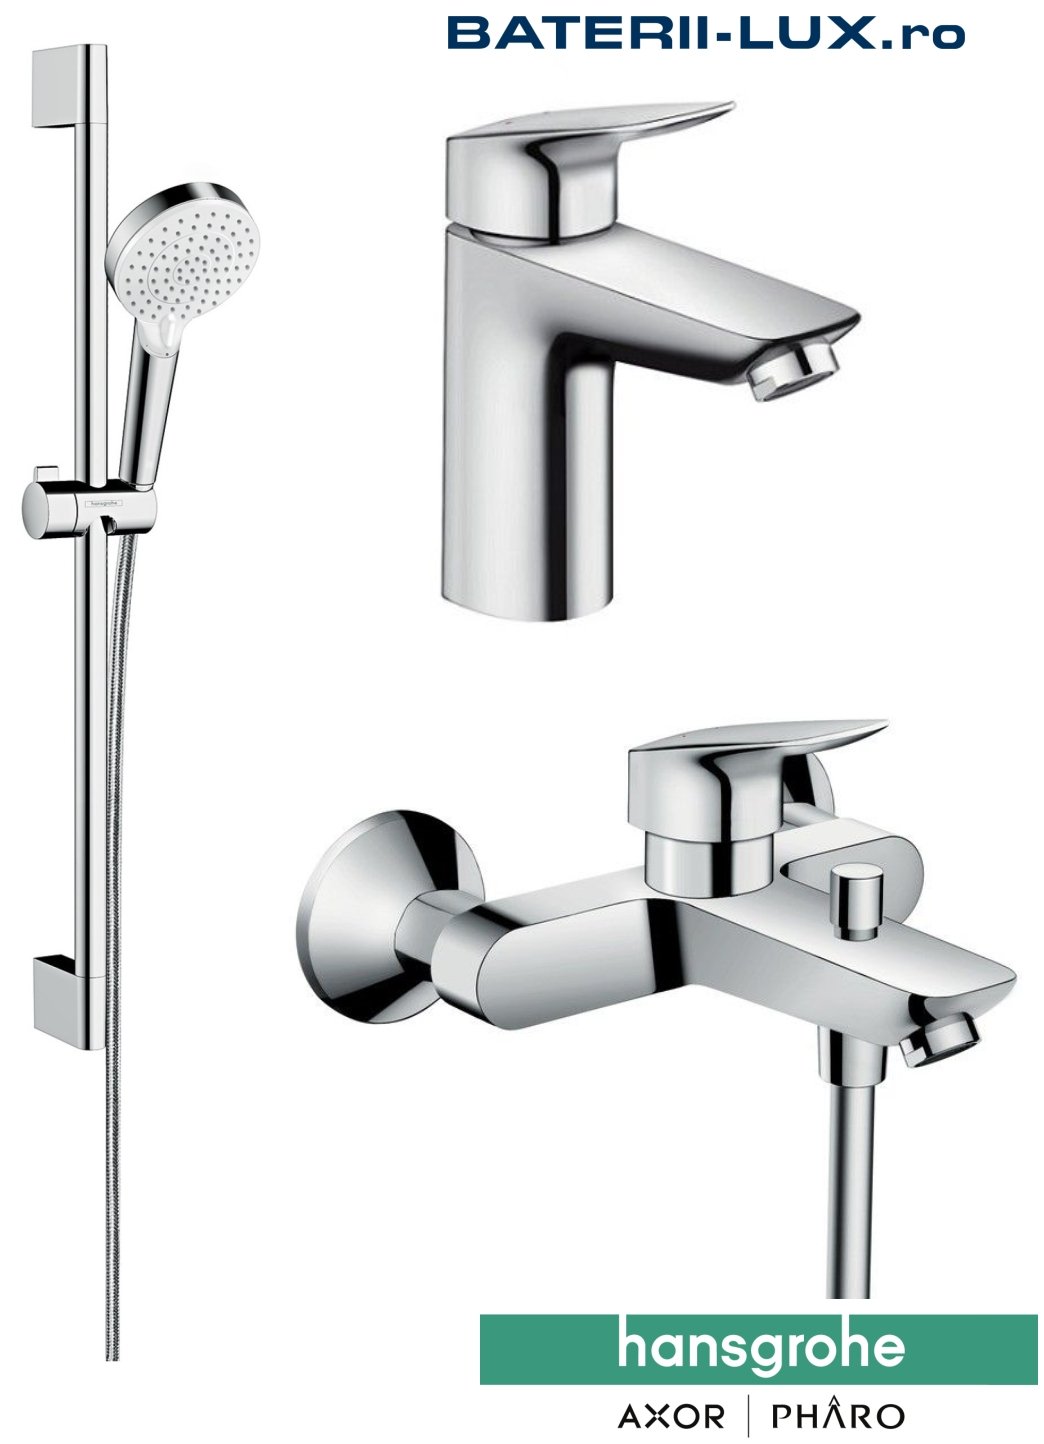 Set complet baterii baie cada Hansgrohe Logis100(71100000,71400000,26532400) baterii-lux.ro/